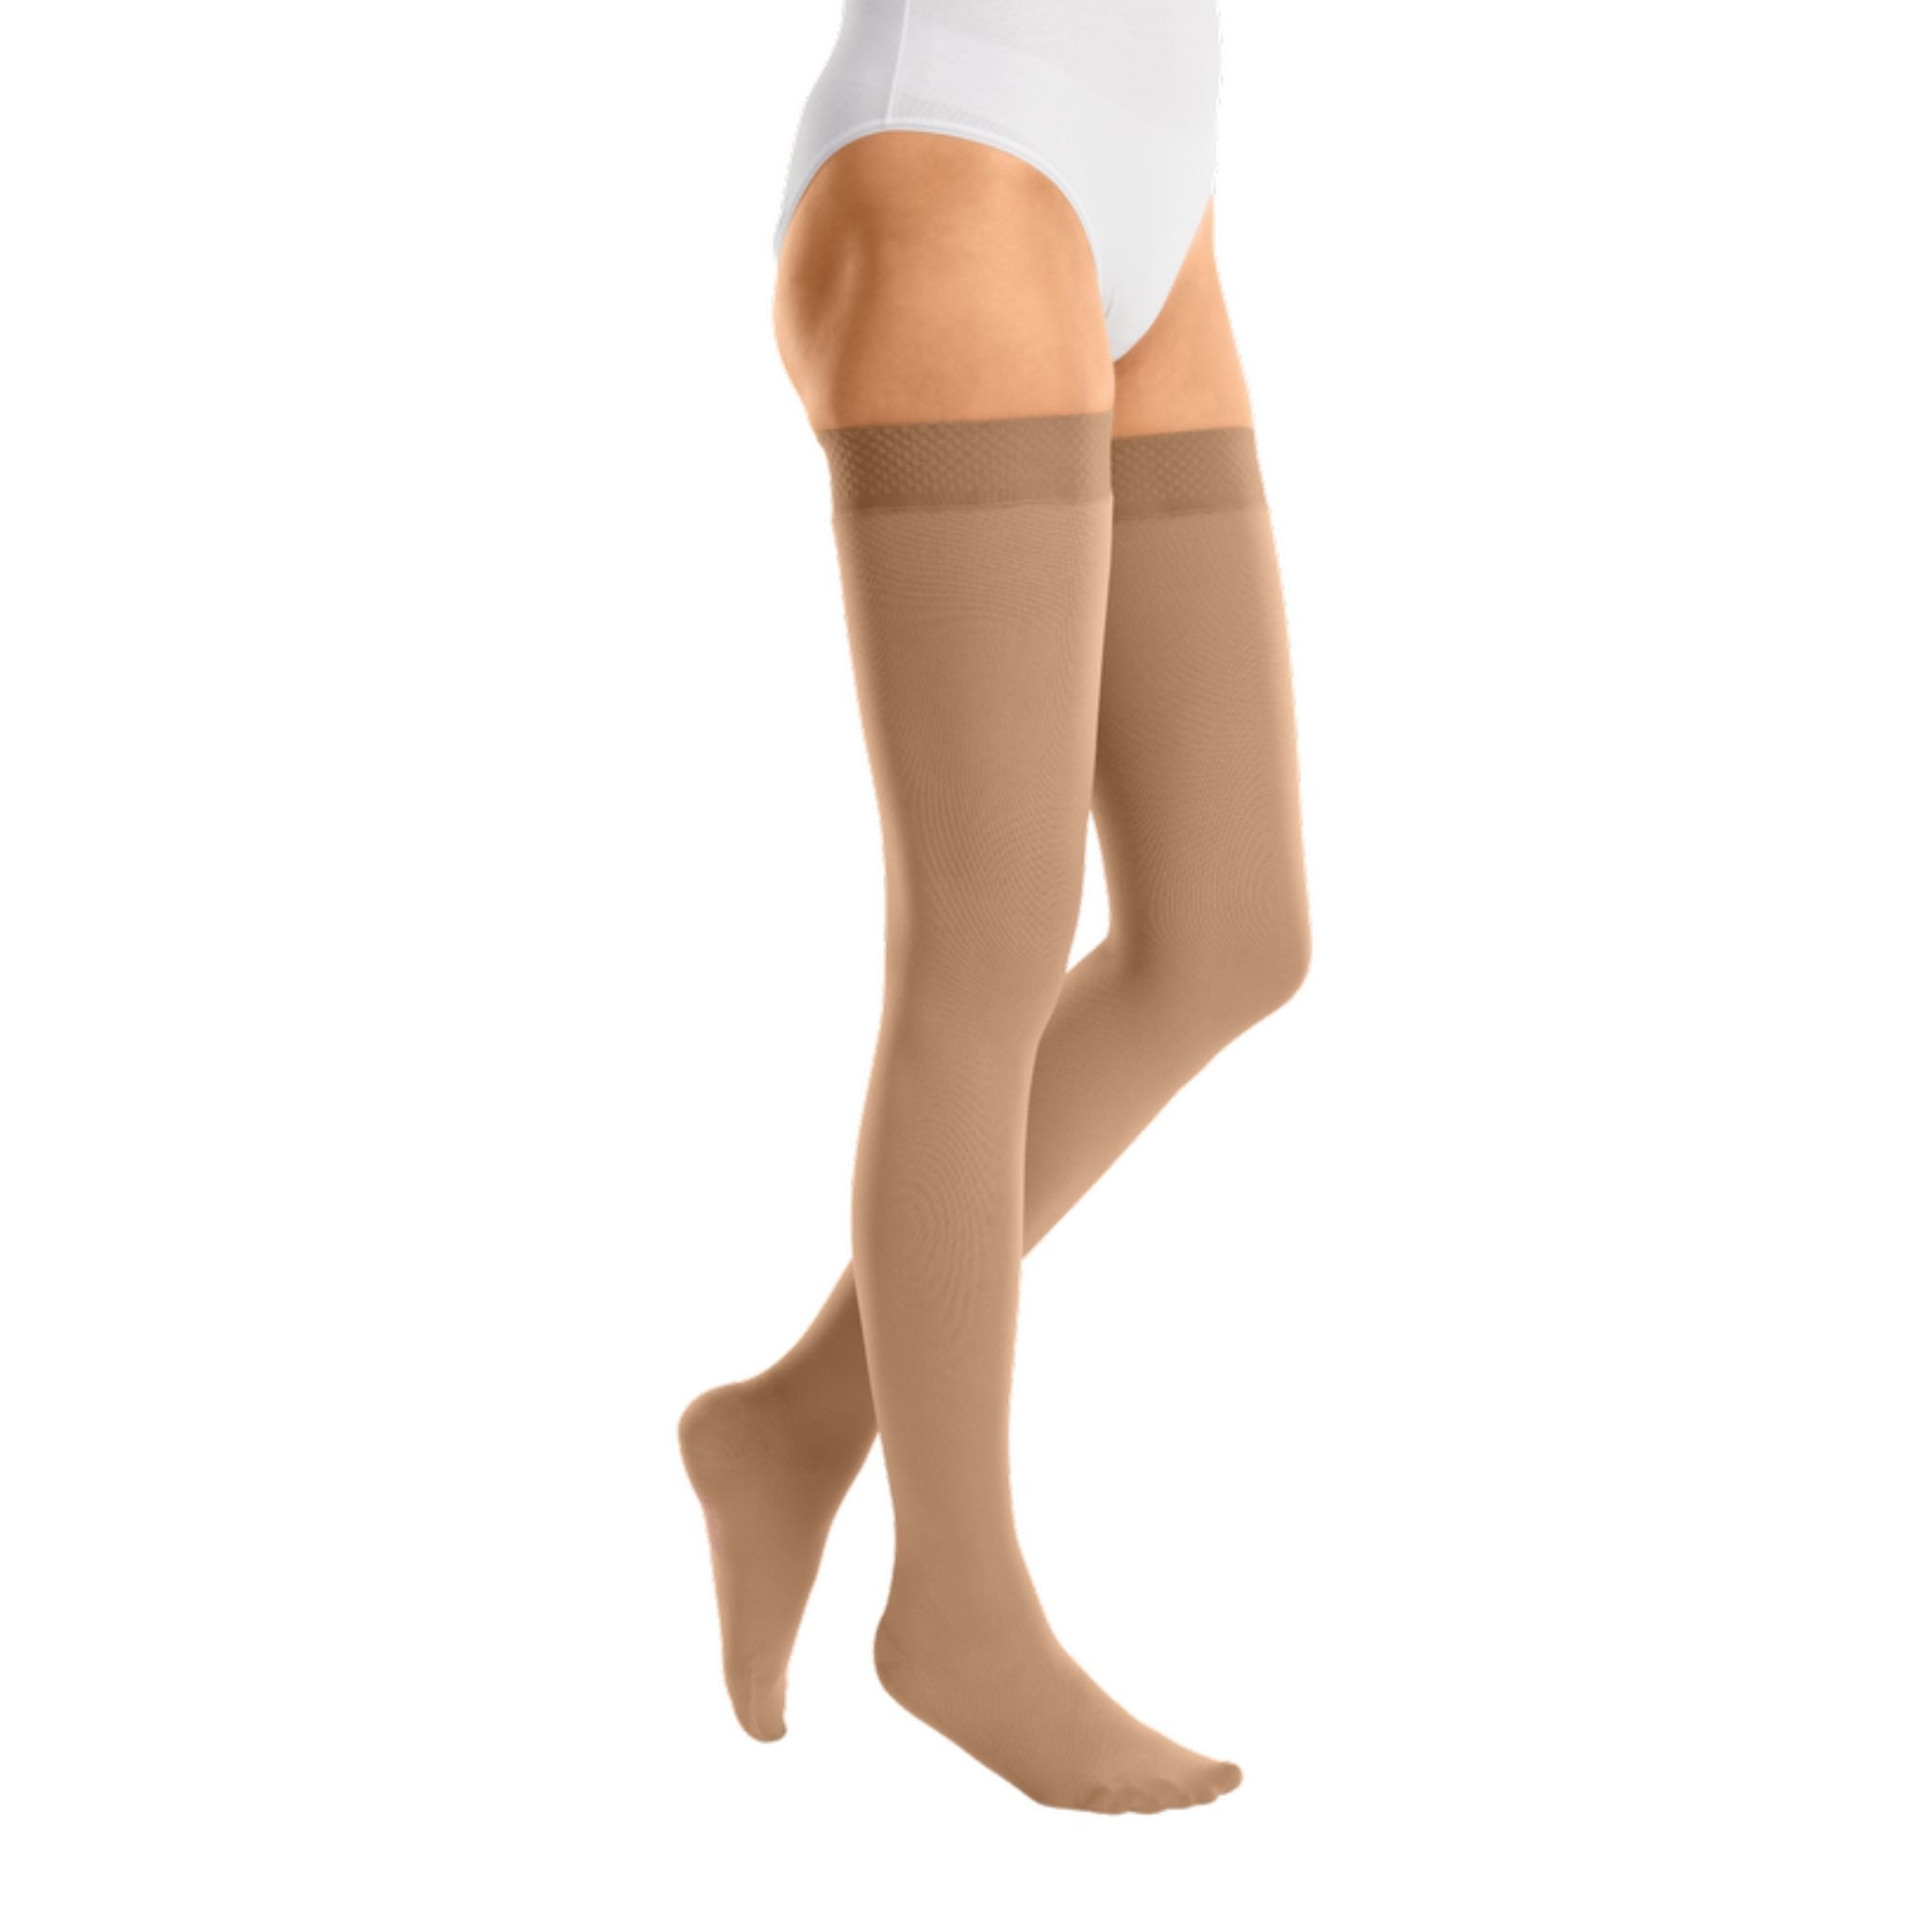 Compression Stockings  Thigh High  Silicone Topband  Closed Toe  Caramel  mediven cotton